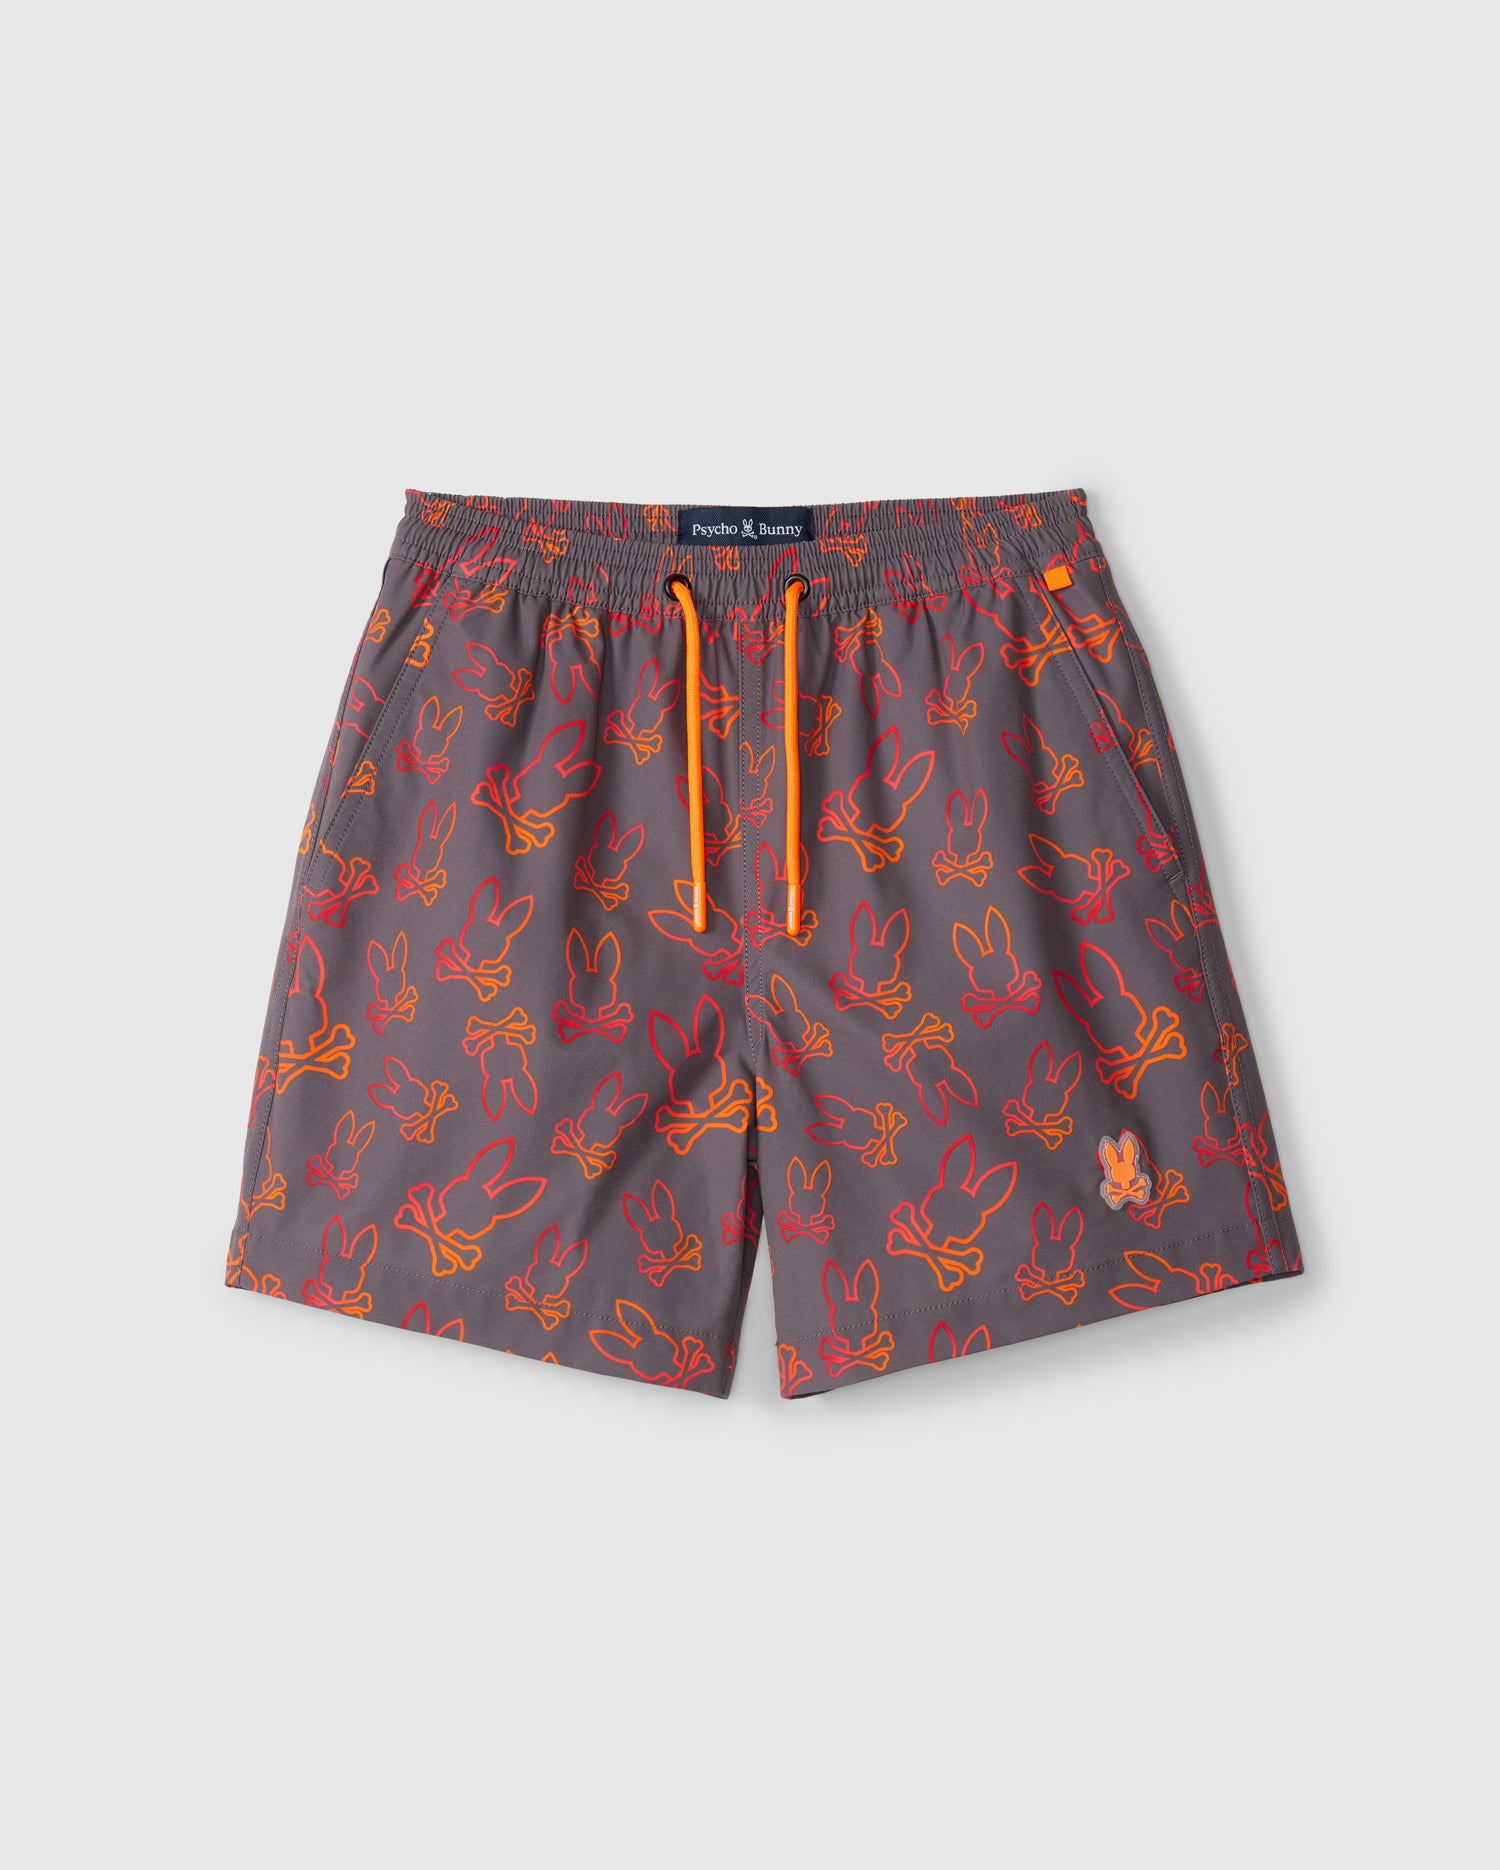 Gray kid's swim trunks featuring an all-over playful bunny pattern in orange and red outlines. These shorts have a quick-dry fabric, an elastic waistband with a bright orange drawstring, and a navy label on the waistband. The trunks are the KIDS SHELDON ALL OVER PRINT SWIM TRUNK - B0W588C200 by Psycho Bunny.